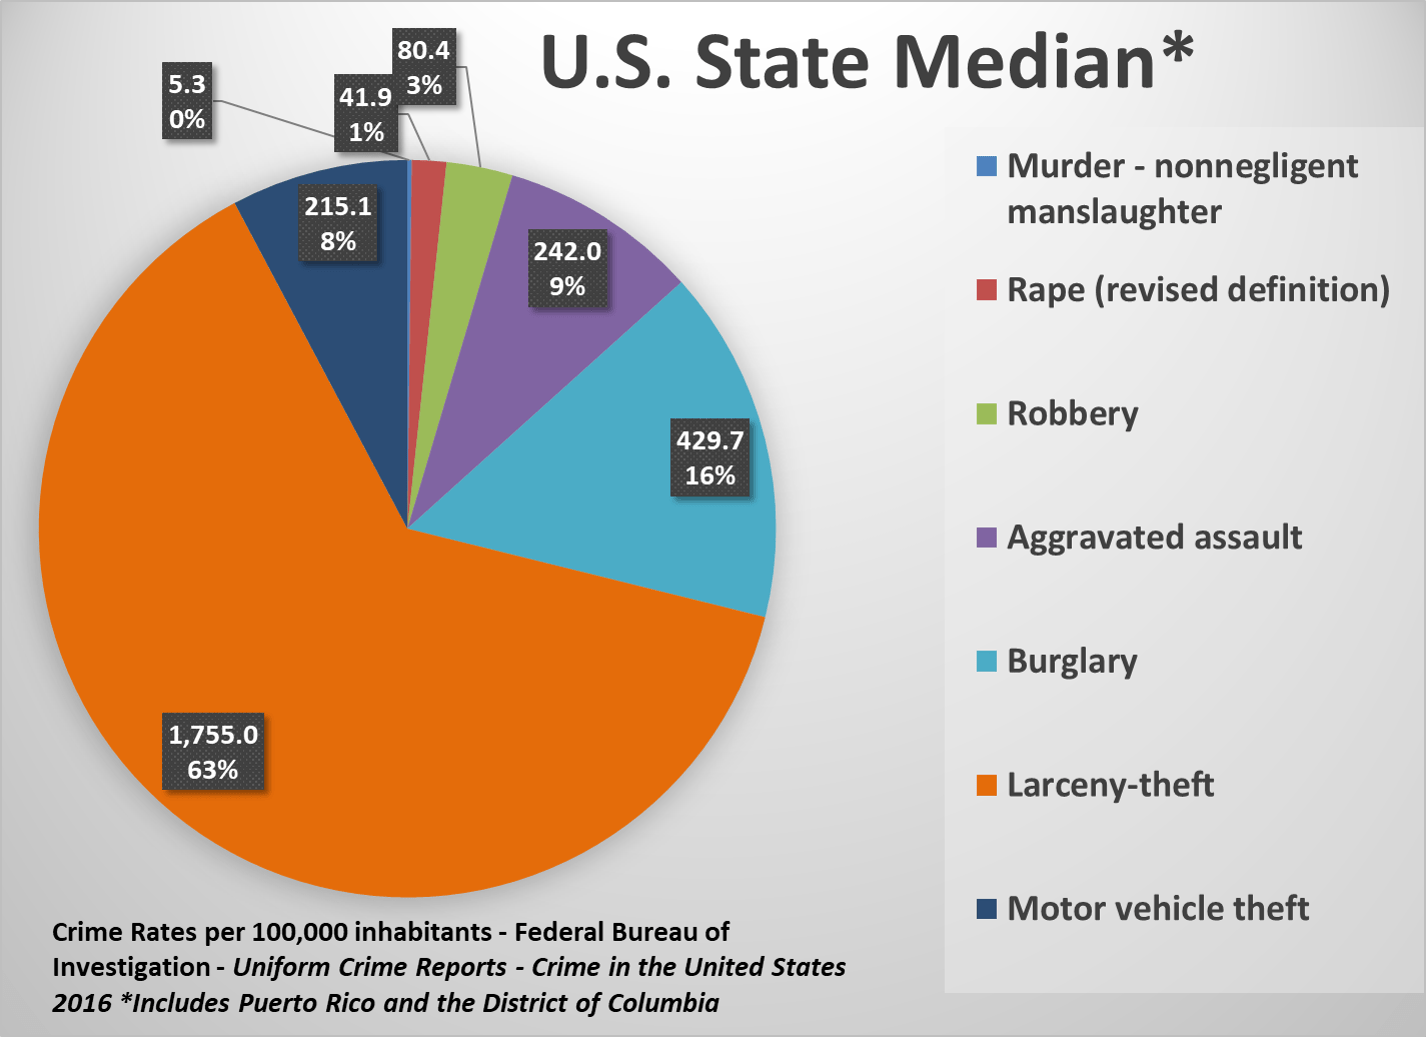 U.S. State Crime Rates Comparing Types of Crimes Across the States